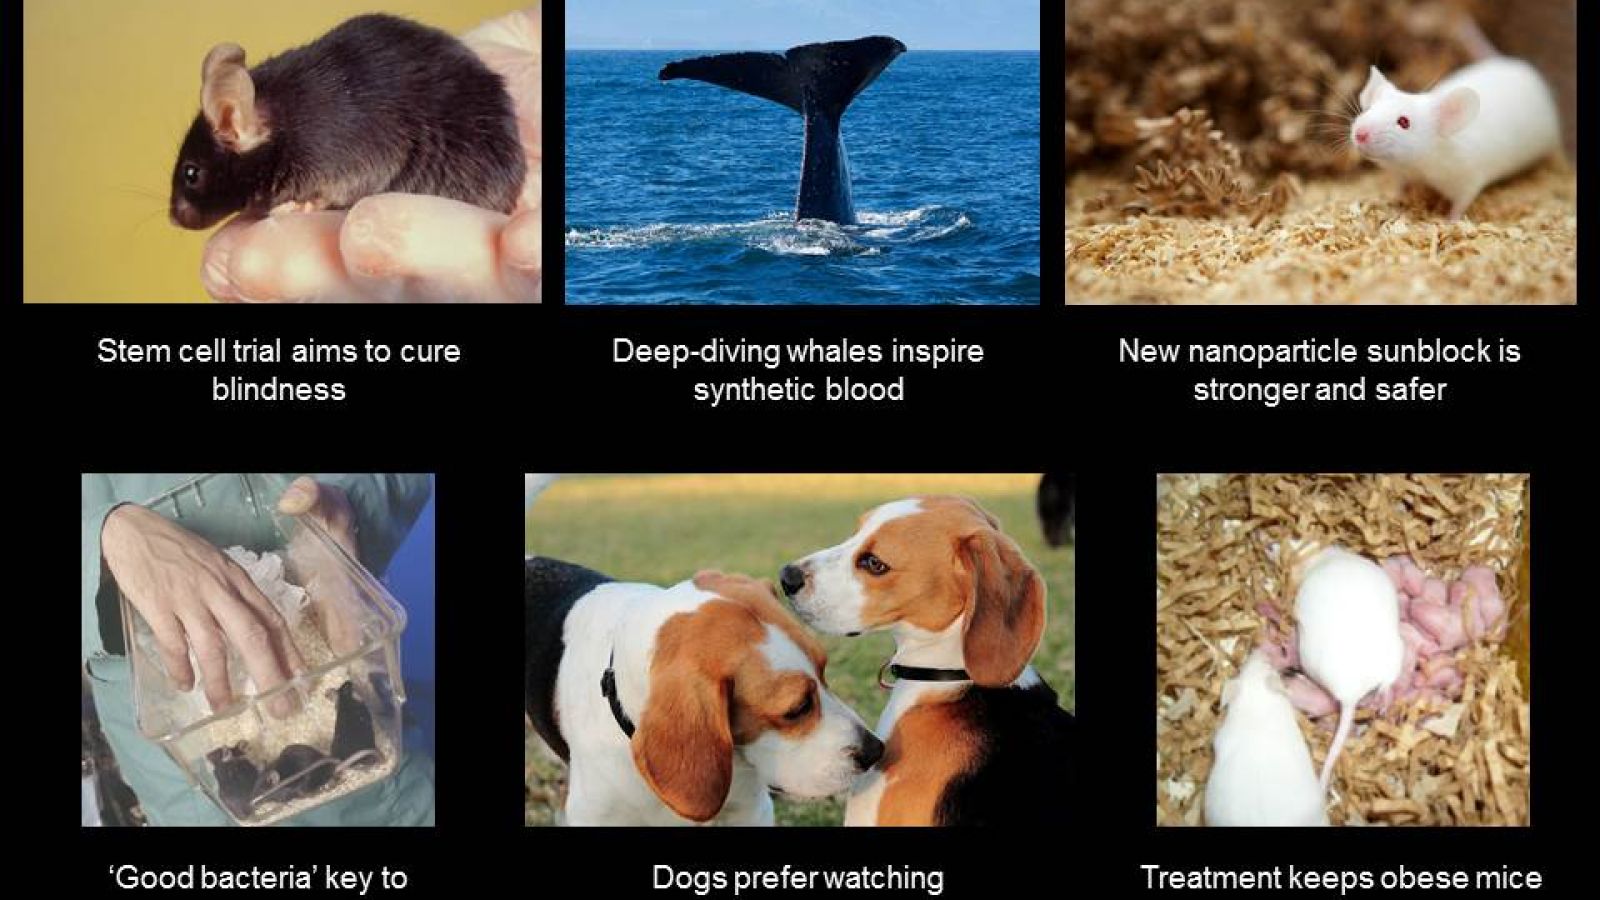 This week in animal research 02/10/15